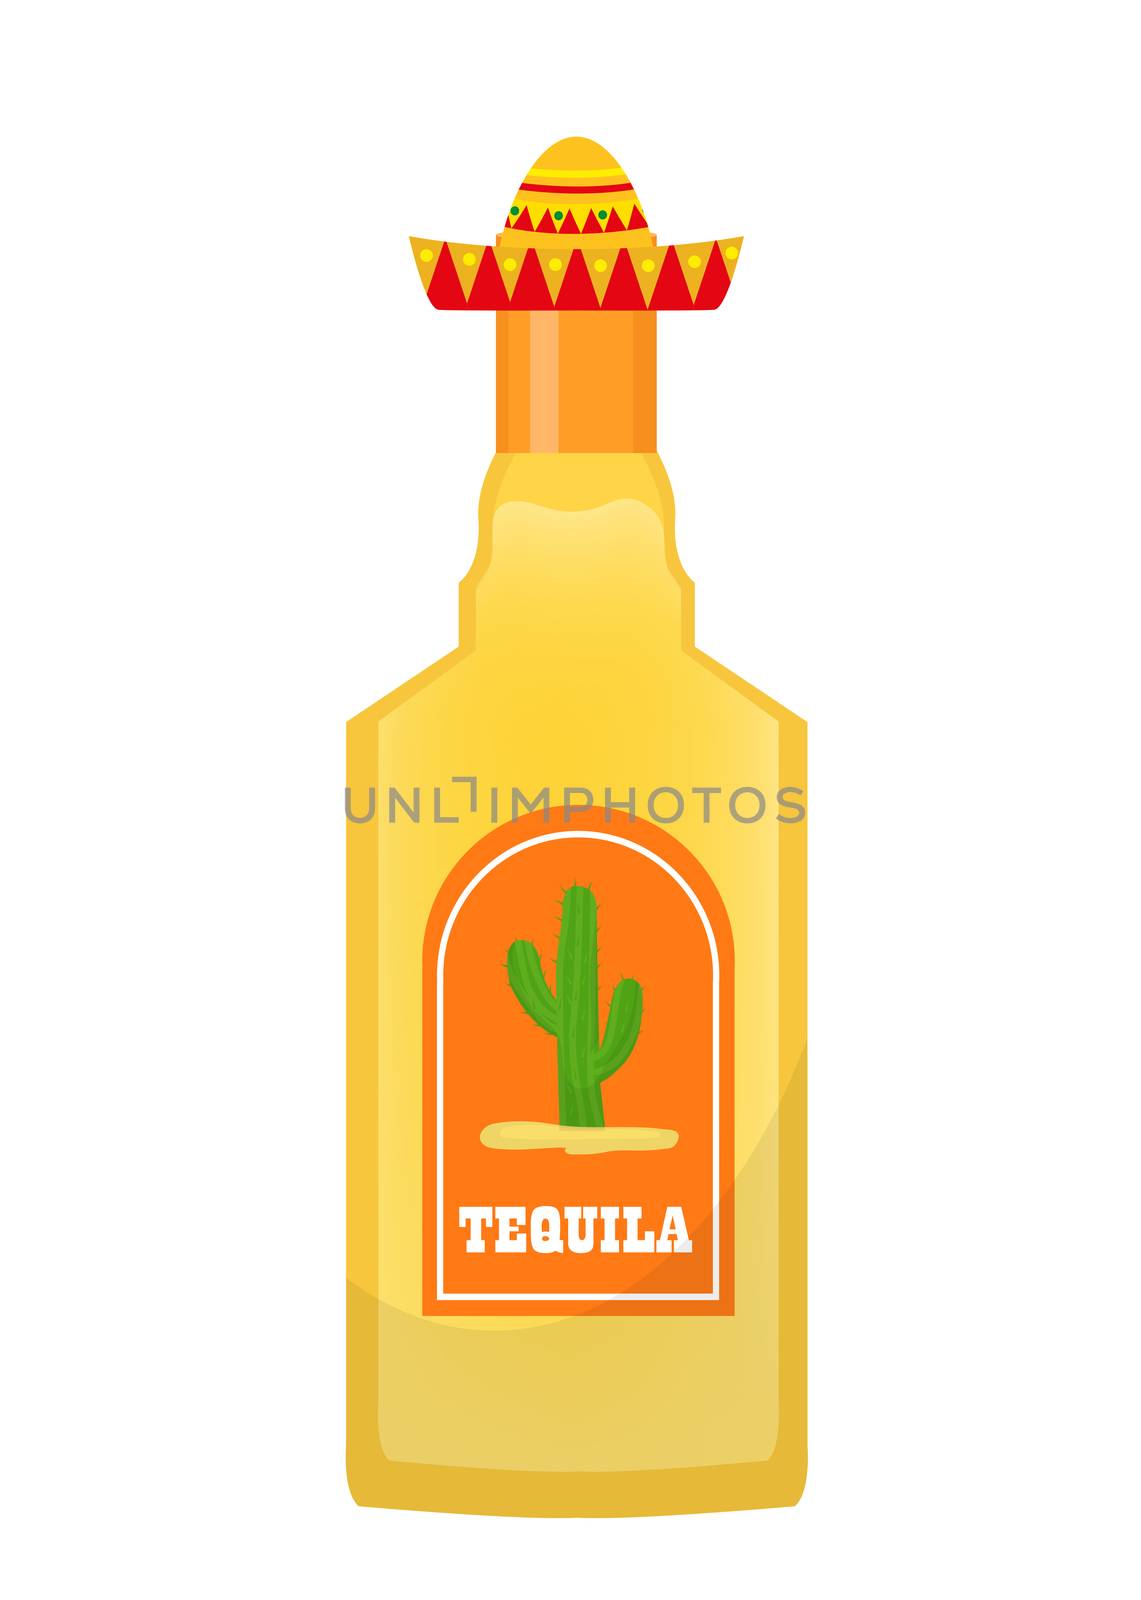 Tequila bottle icon flat, cartoon style isolated on white background. illustration, clip art. Traditional Mexican drink. by lucia_fox